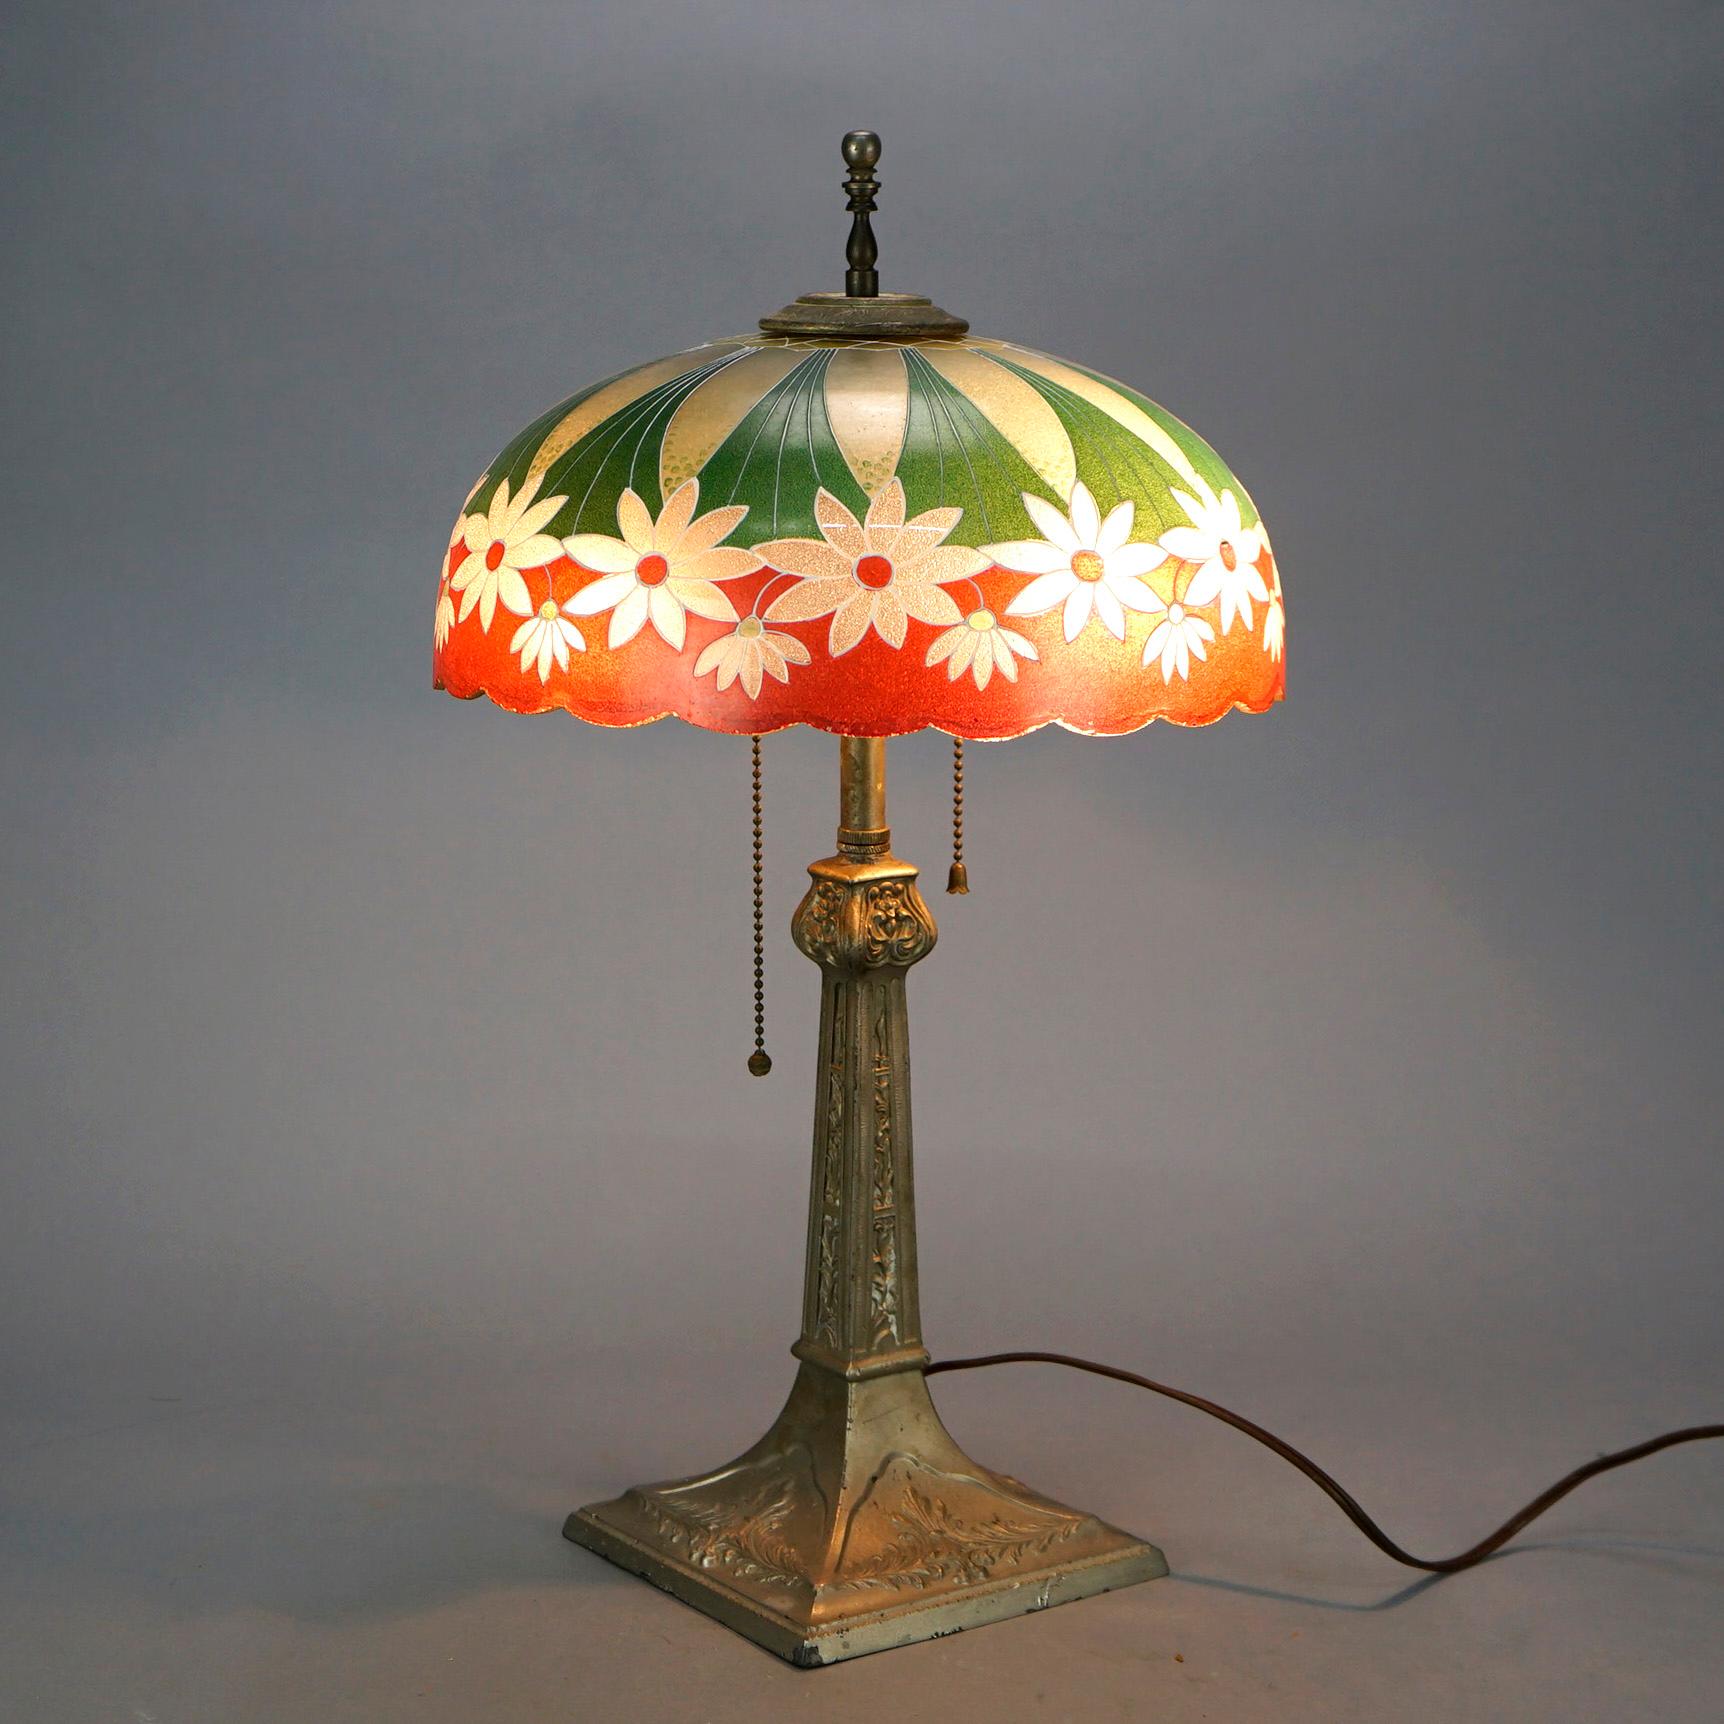 An antique Arts and Crafts table lamp in the manner of Pittsburgh Lamp Co offers glass dome form shade decorated with repeating pattern of daisies and scalloped rim over cast double socket base having embossed foliate elements, c1920

Measures-